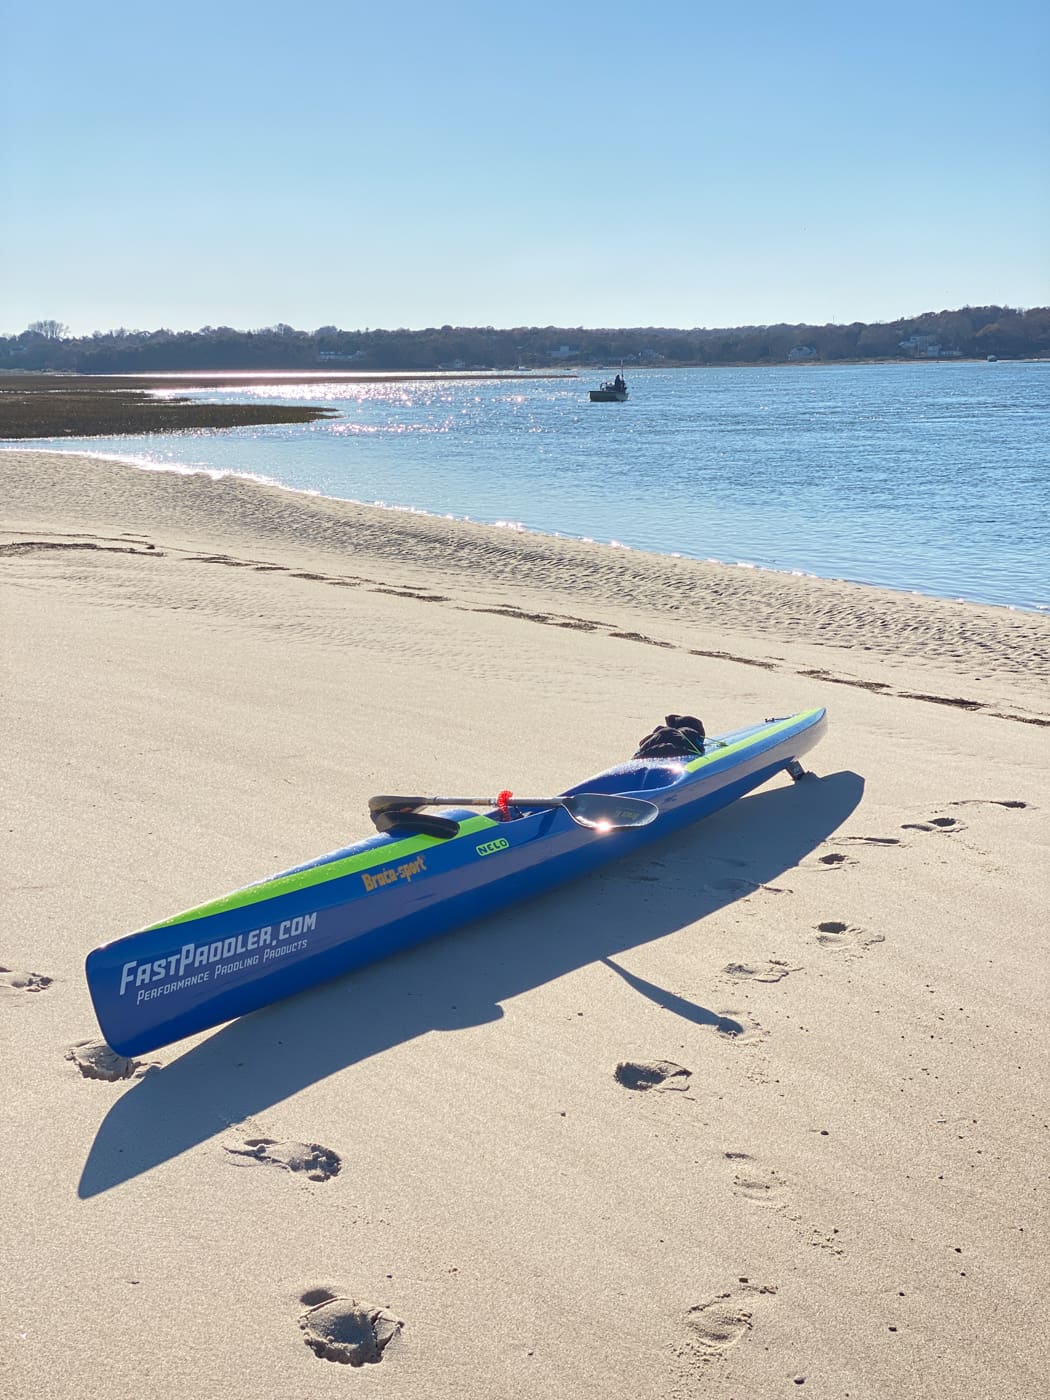 Nelo 550 Review - image of Blue Nelo 550 G1 at Nauset Cove, Cape Cod